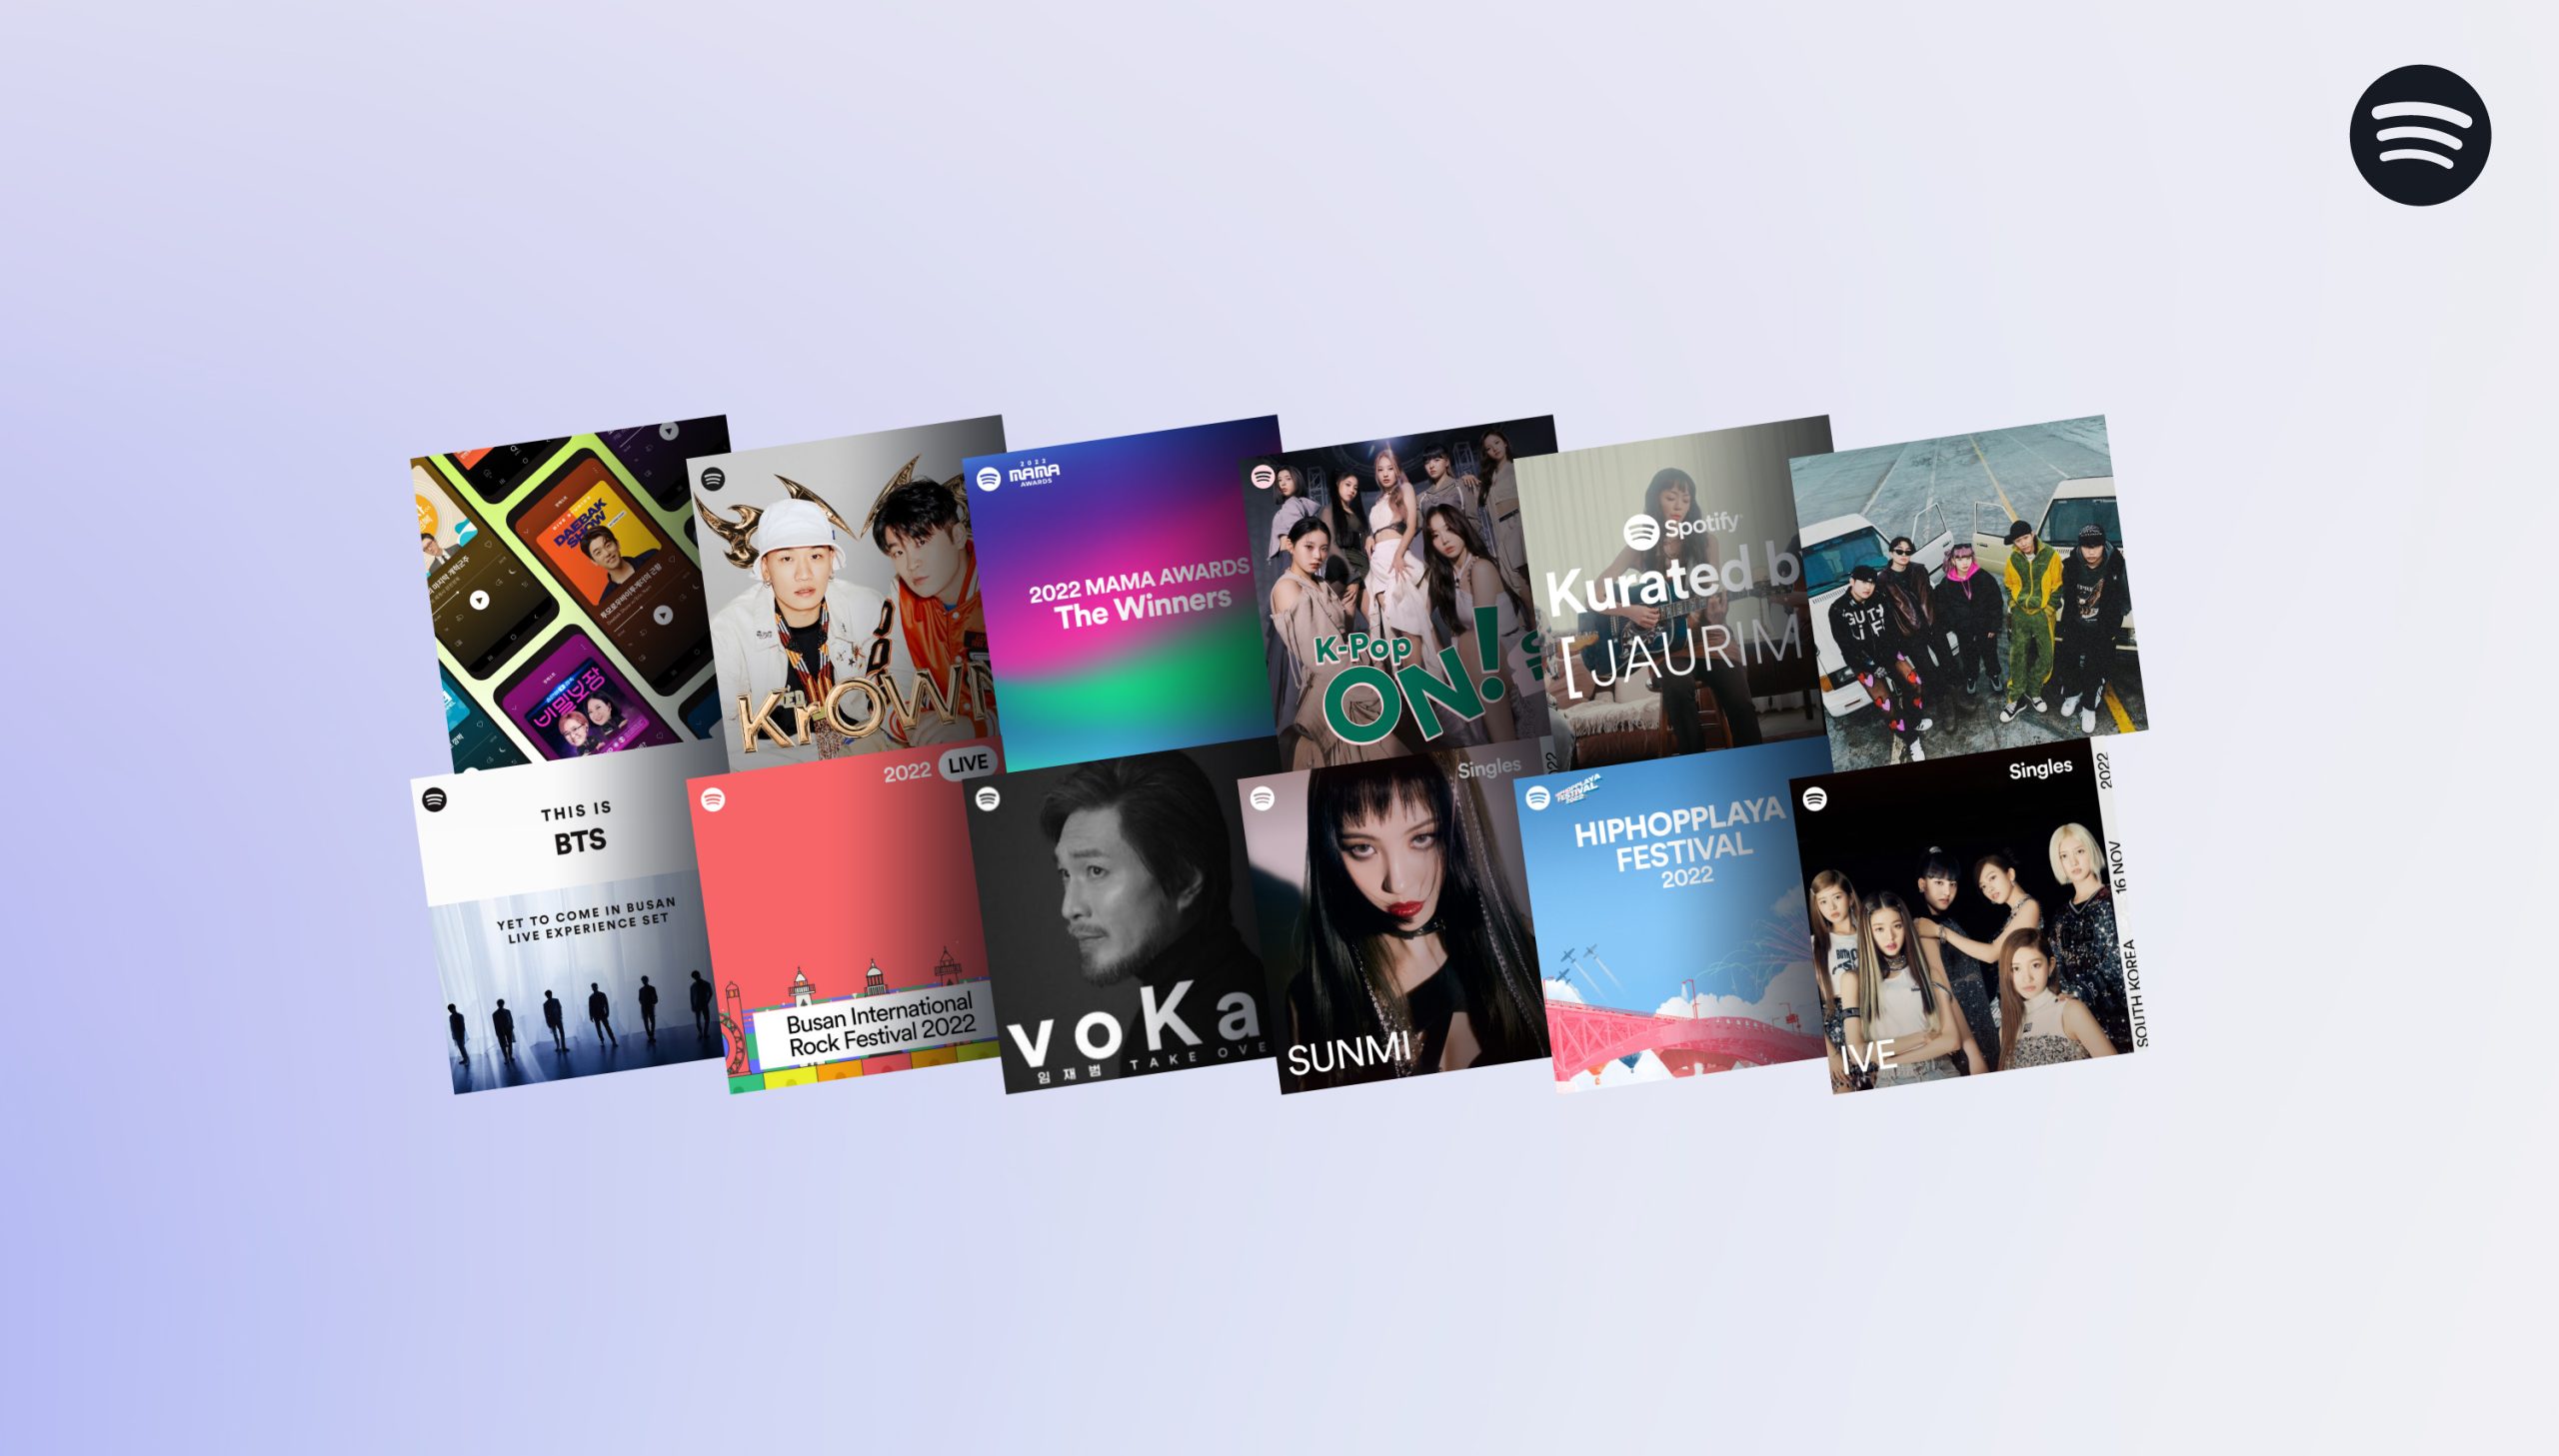 Album art from spotify milestones in korea over the past year